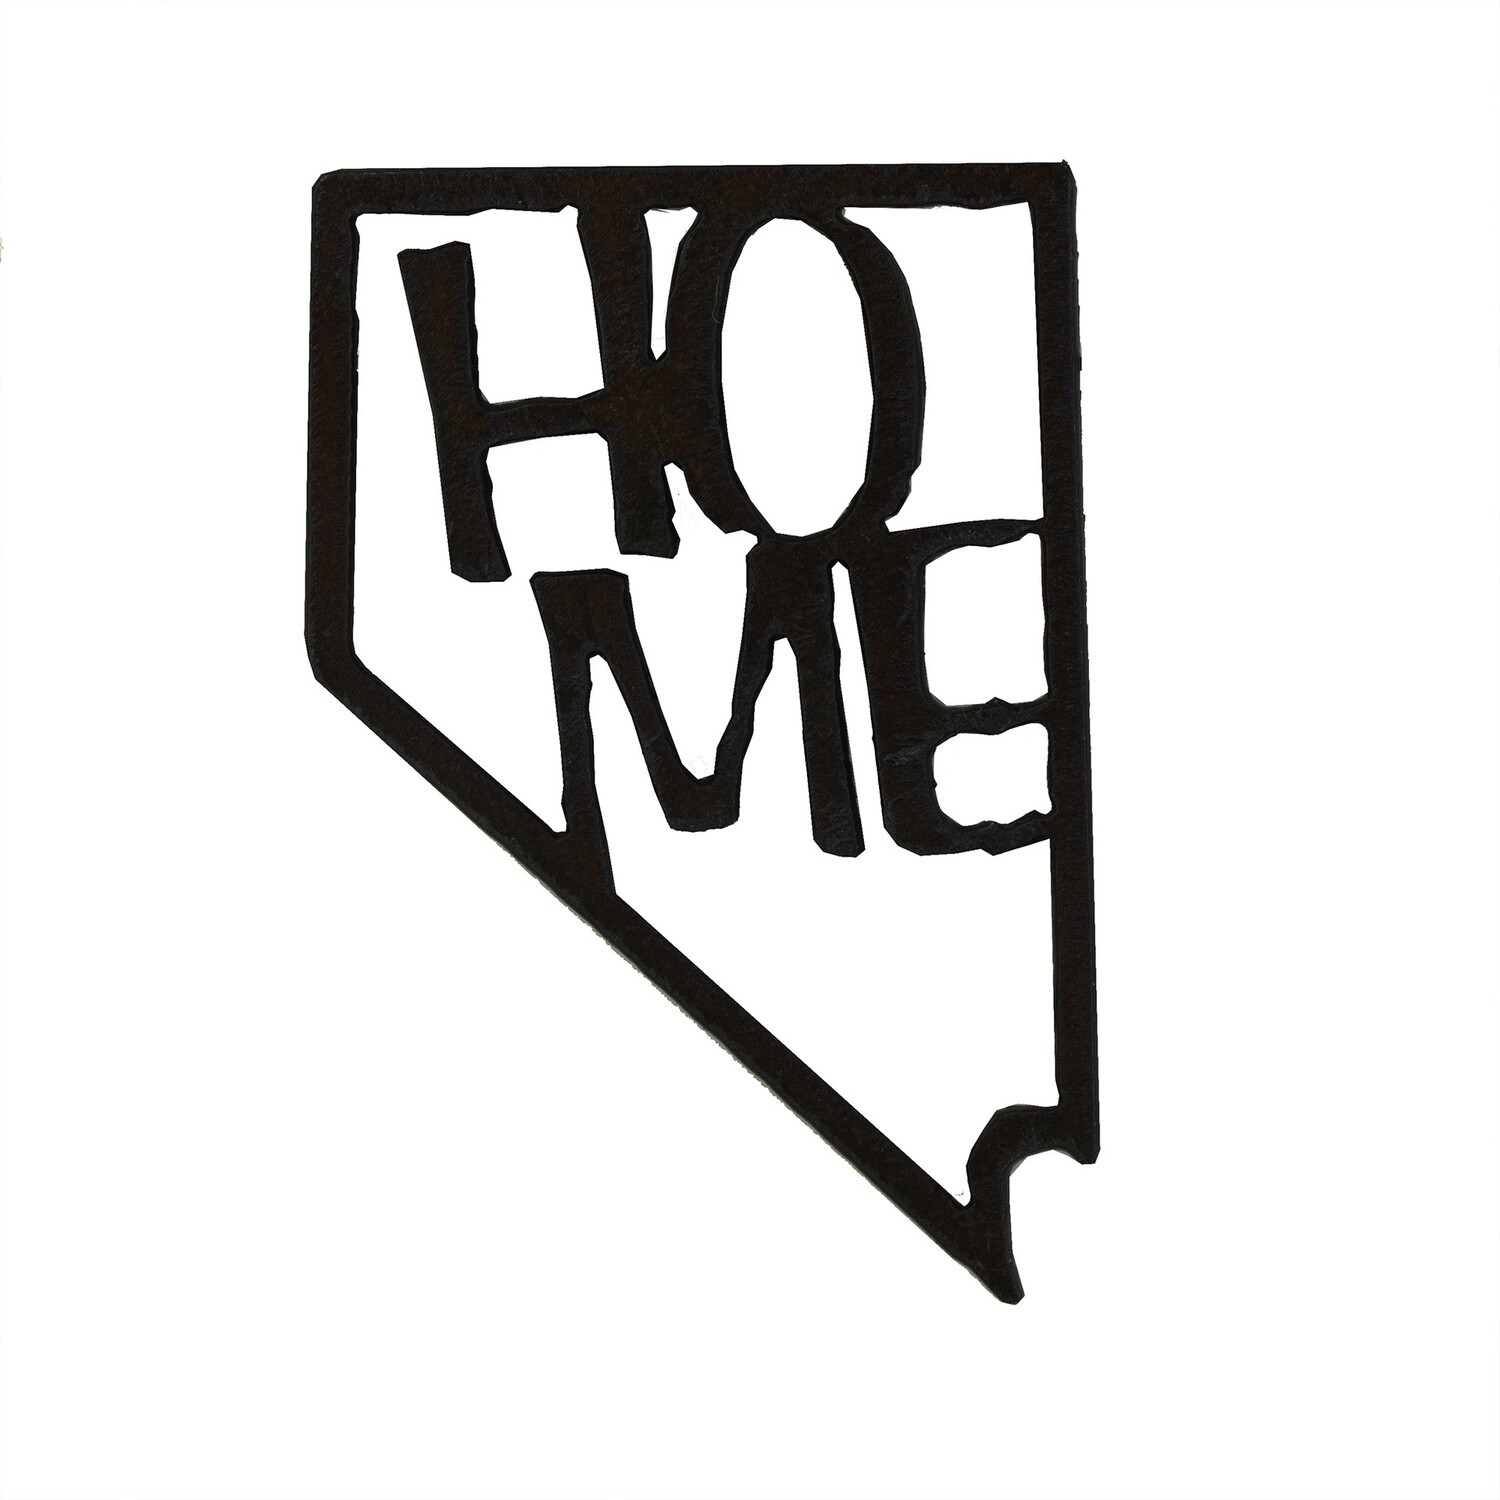 Nevada Shaped Magnet w/ "Home"